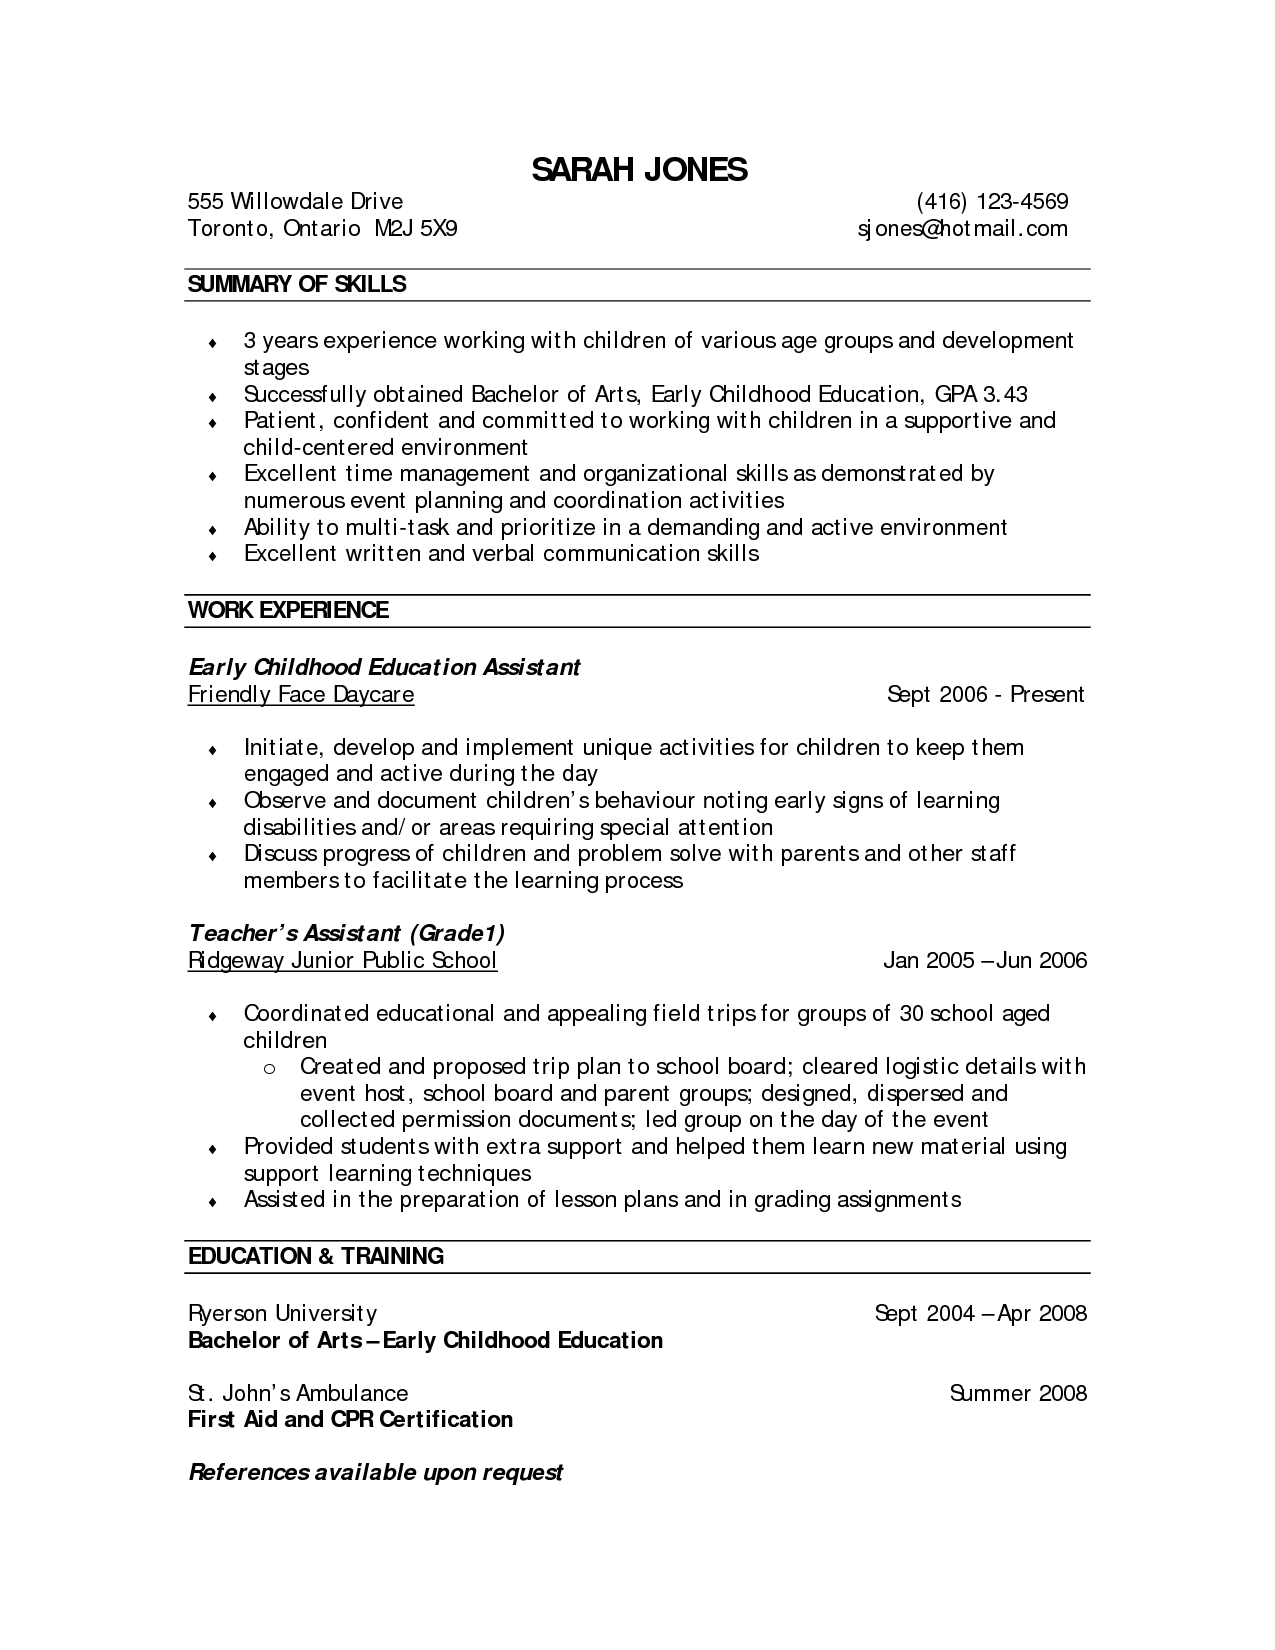 Resume for ece final year student